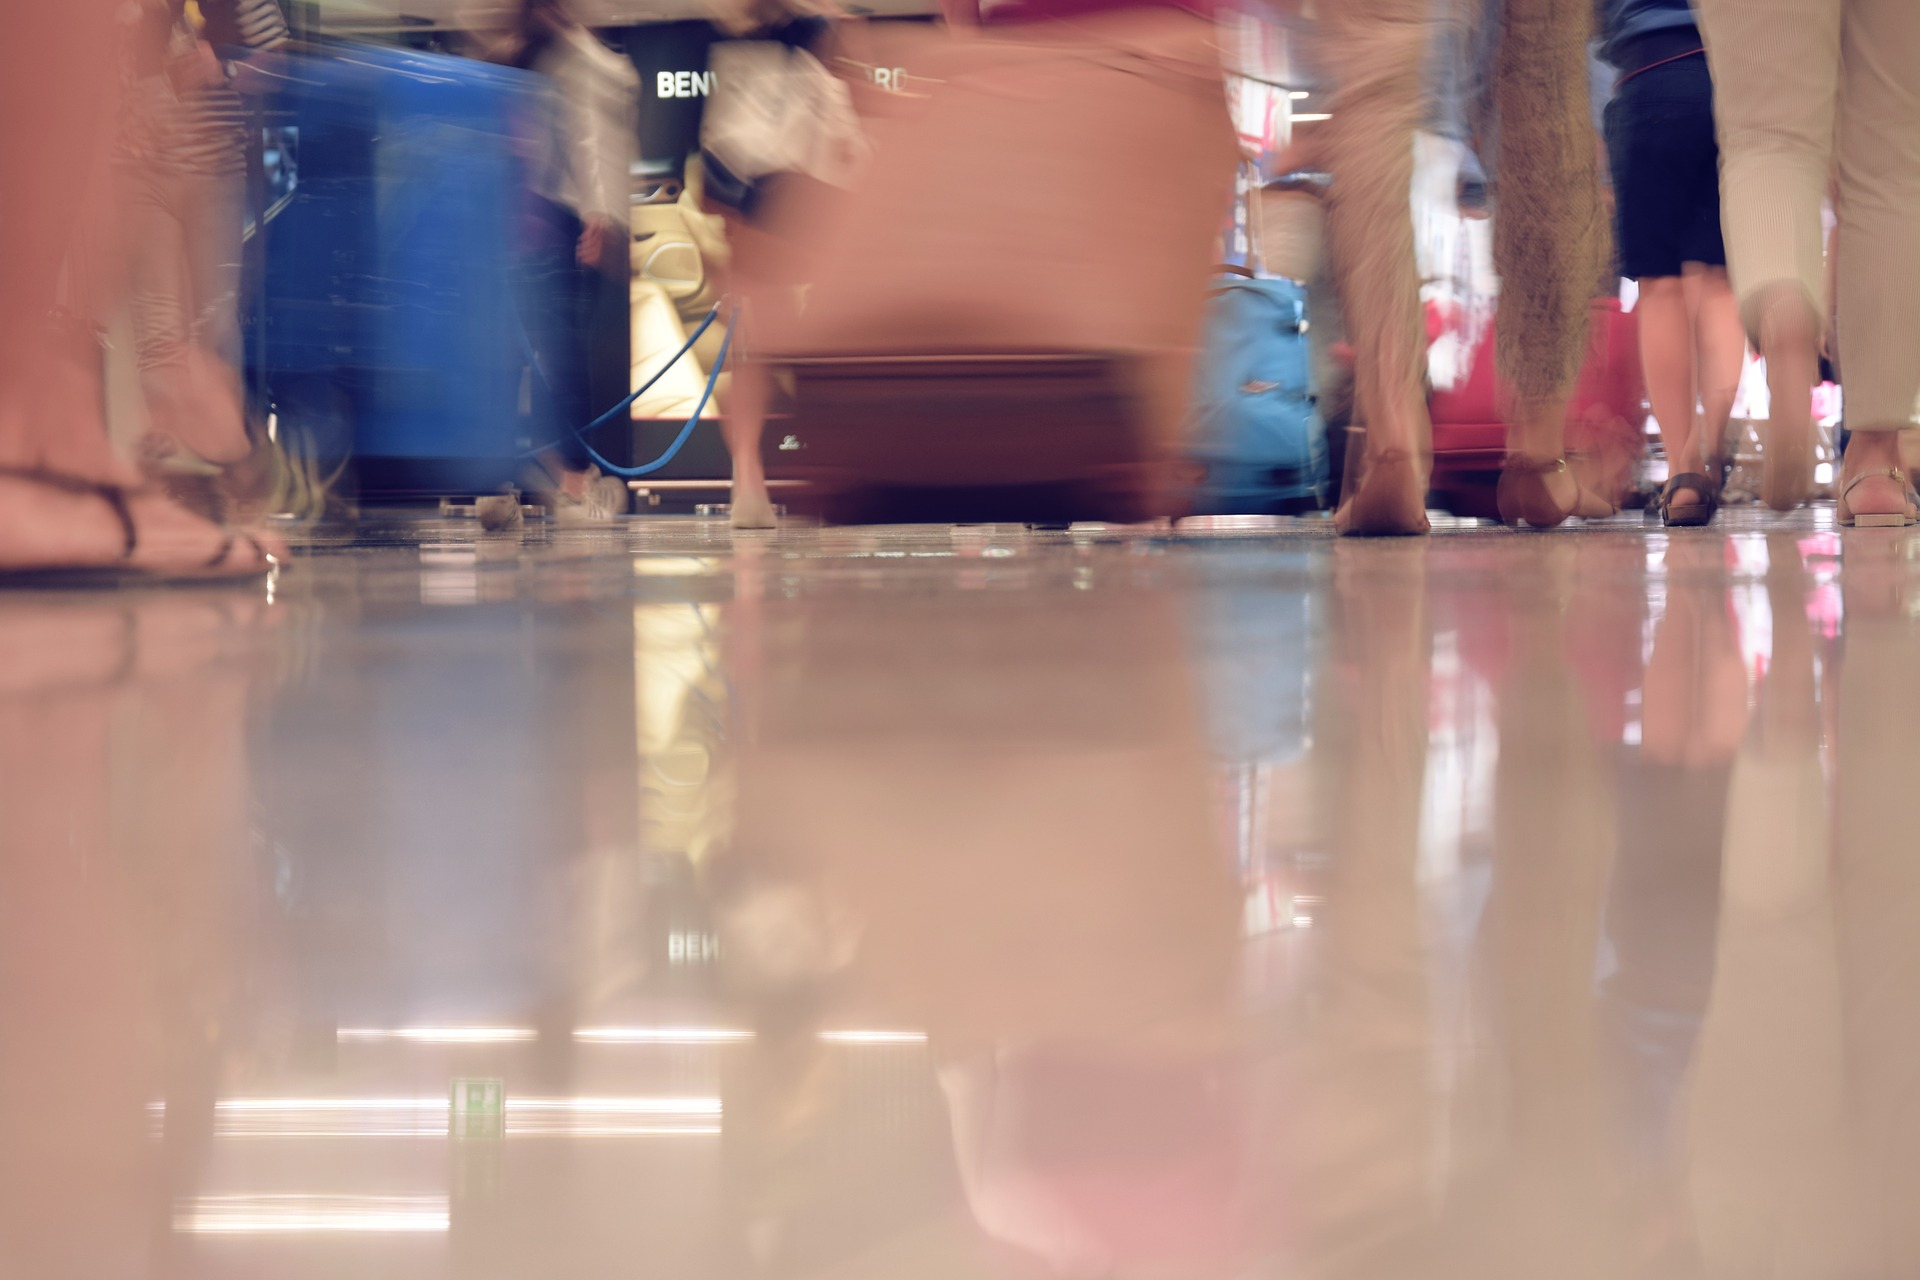 people and suitcases reflected in glossy airport floor Image by ilaria piras from Pixabay